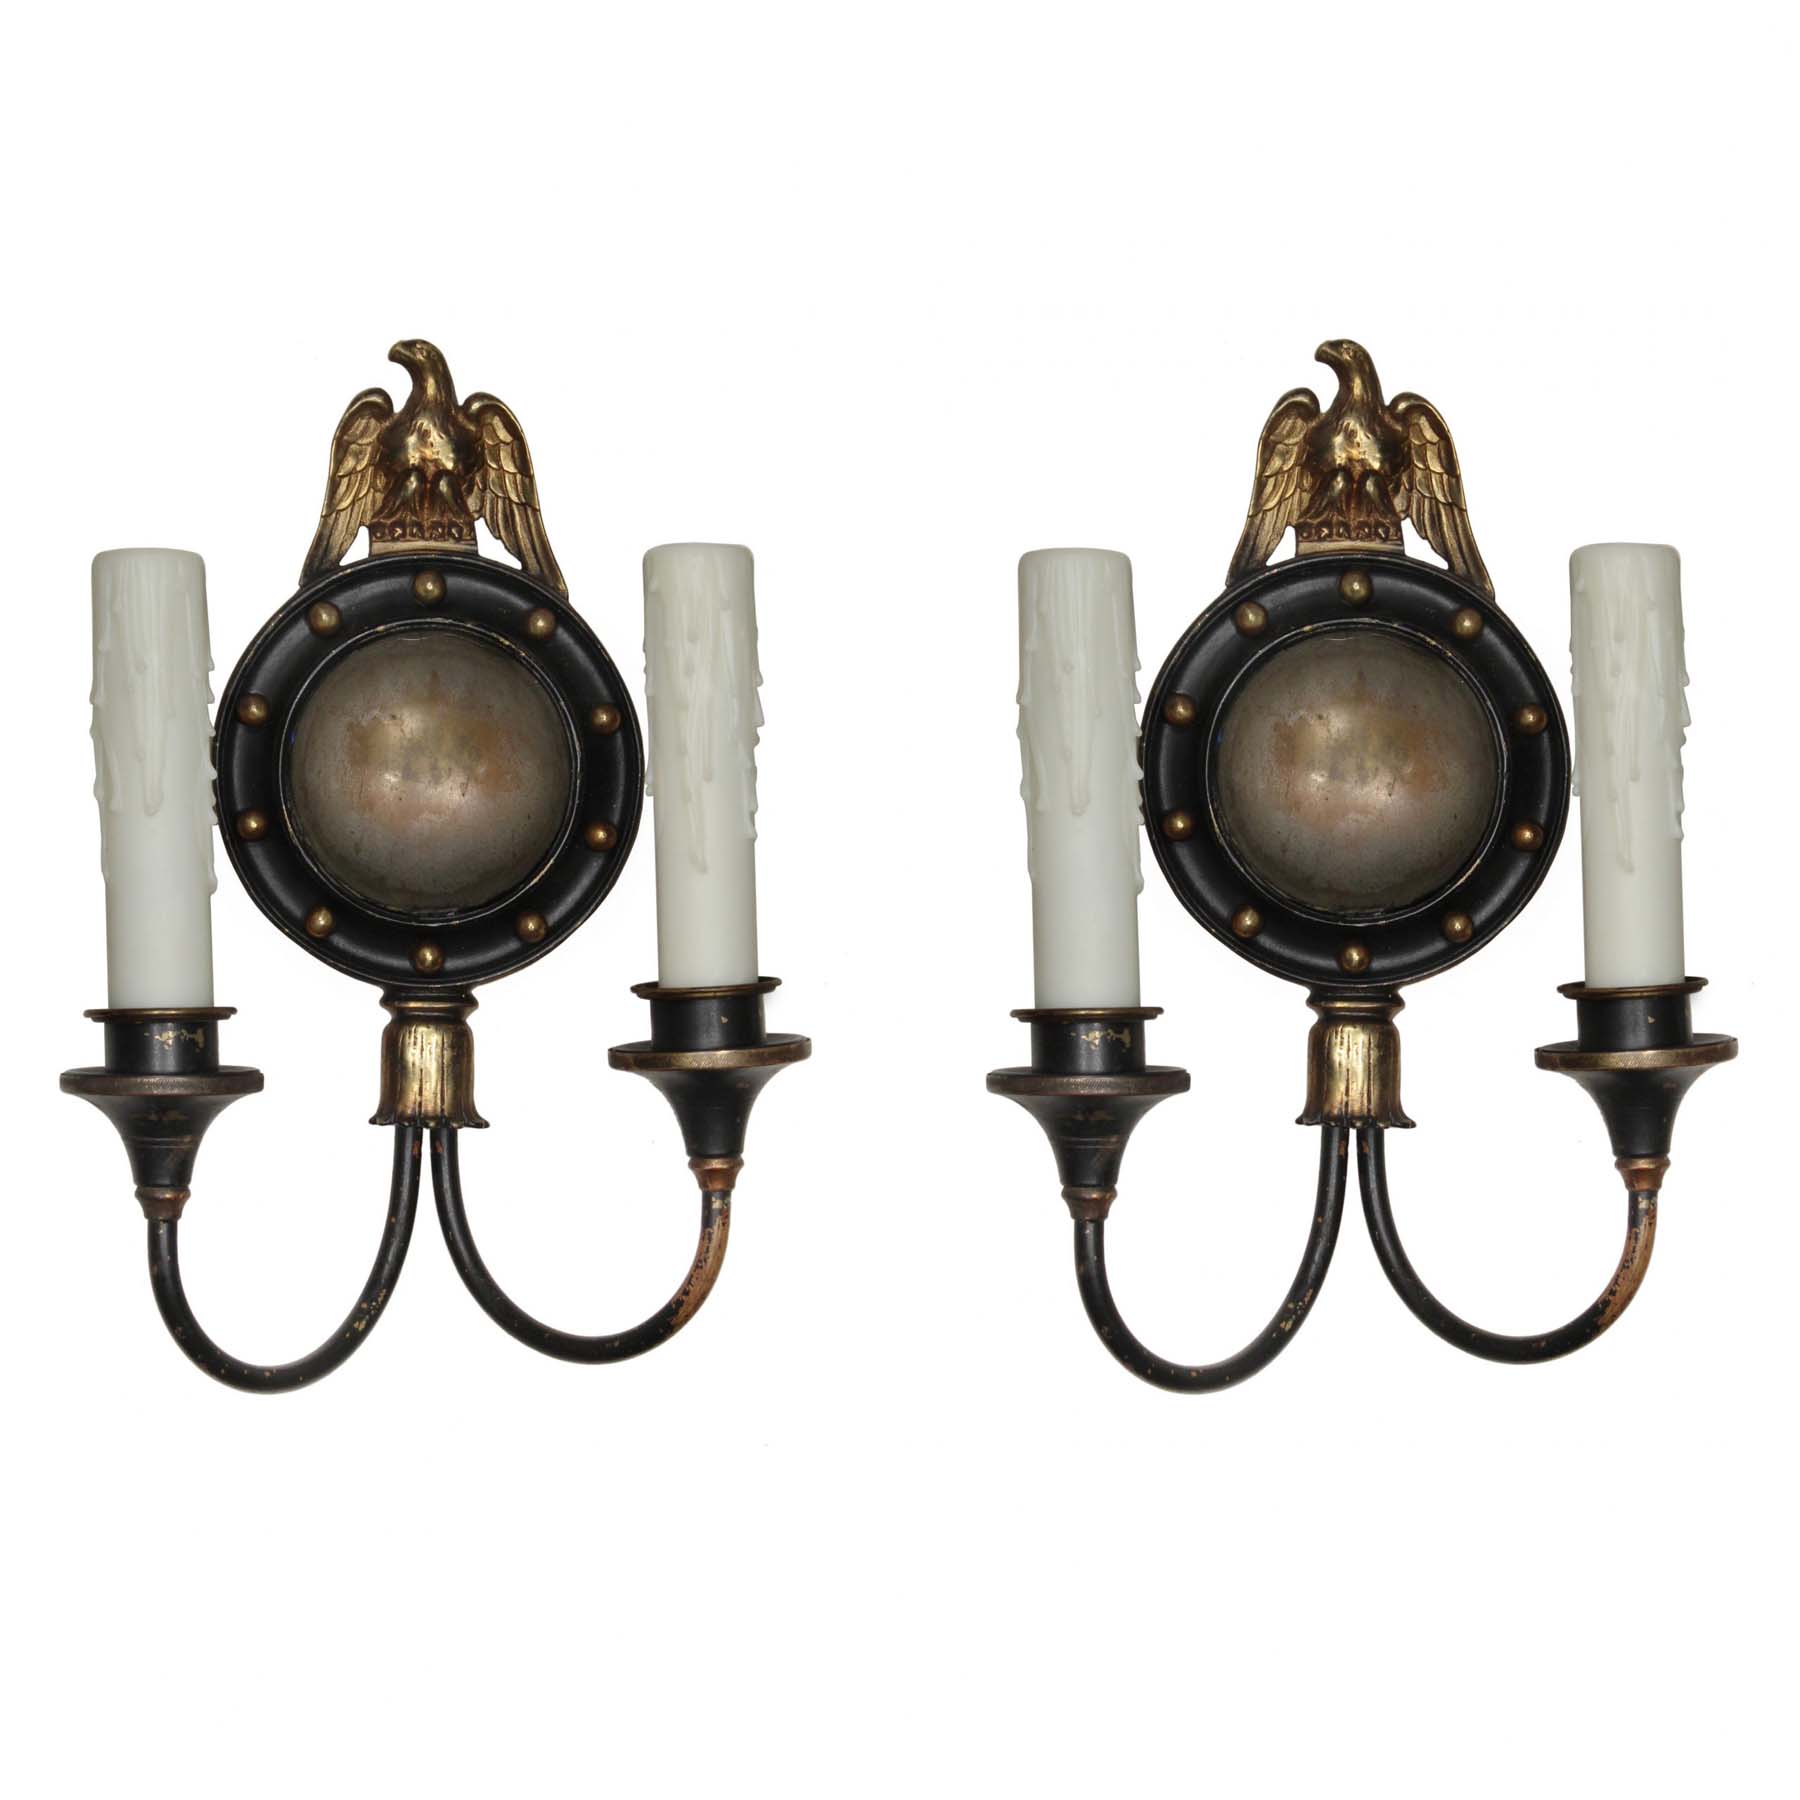 SOLD Antique Figural Double-Arm Sconce Pair with Eagles, Lightolier-0